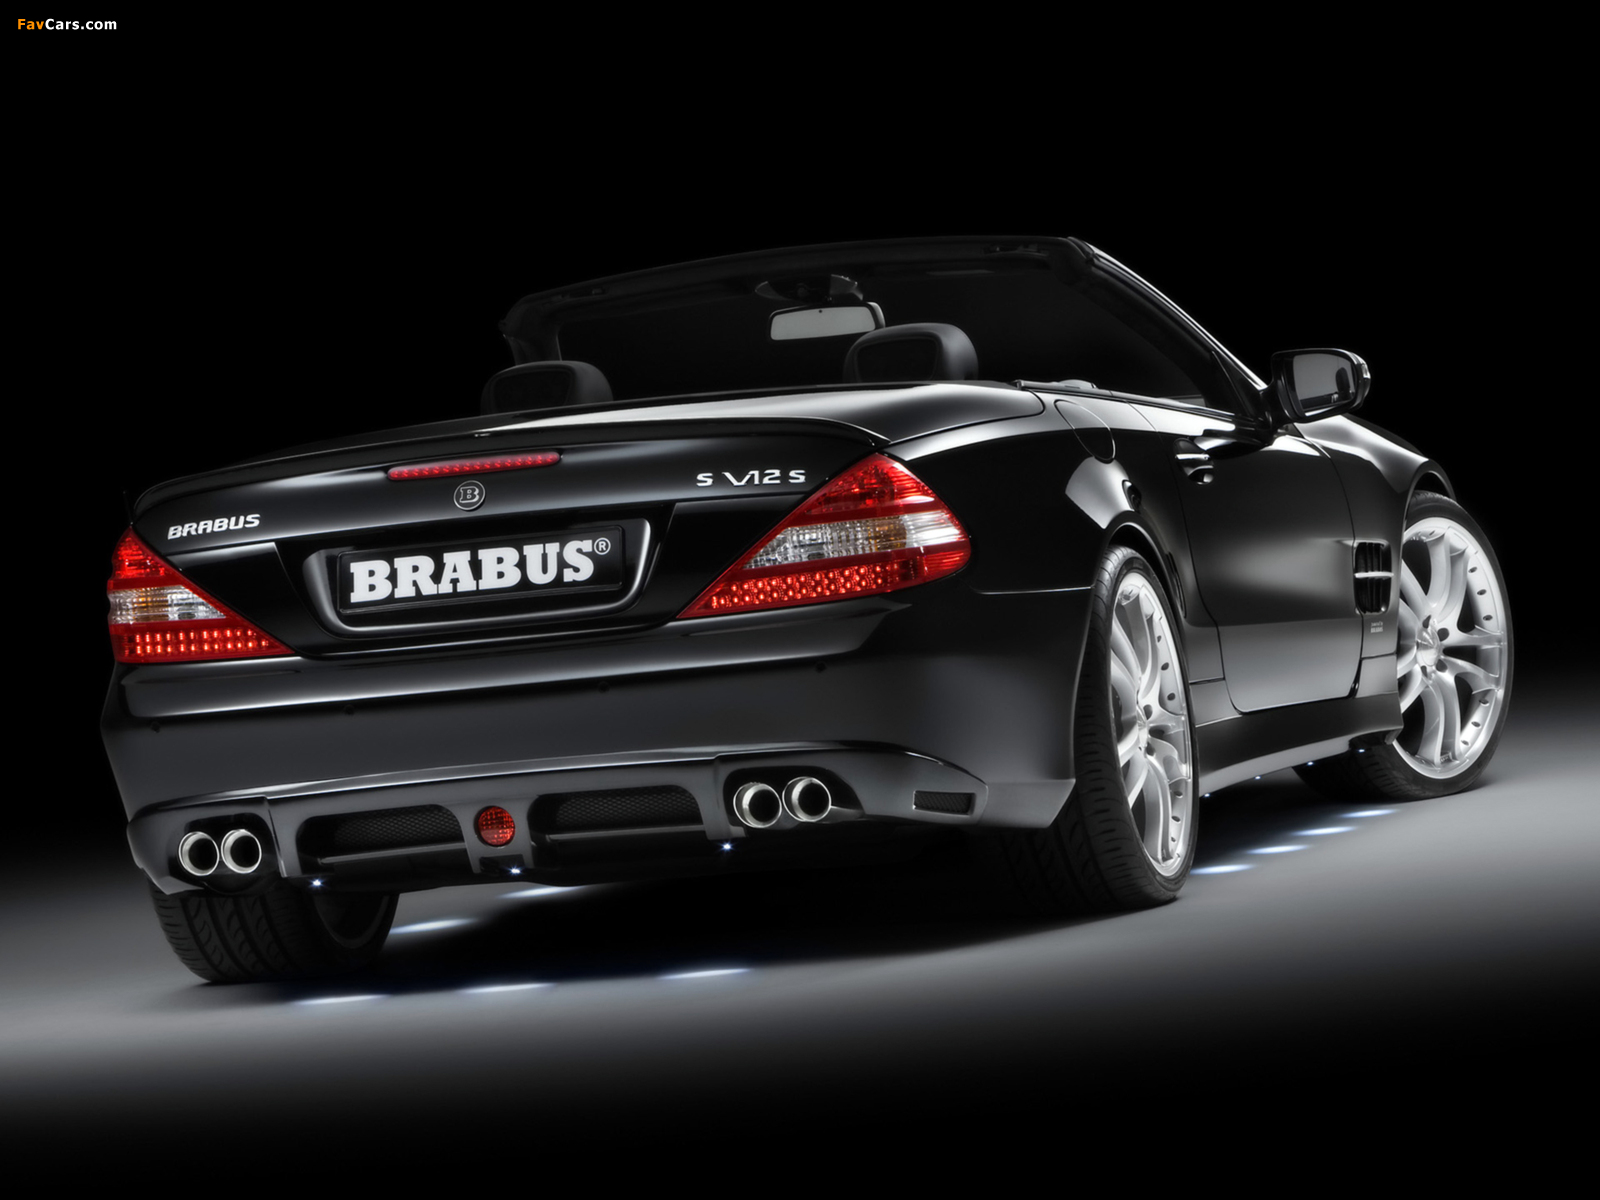 Pictures of Brabus S V12 S (R230) 2008 (1600 x 1200)